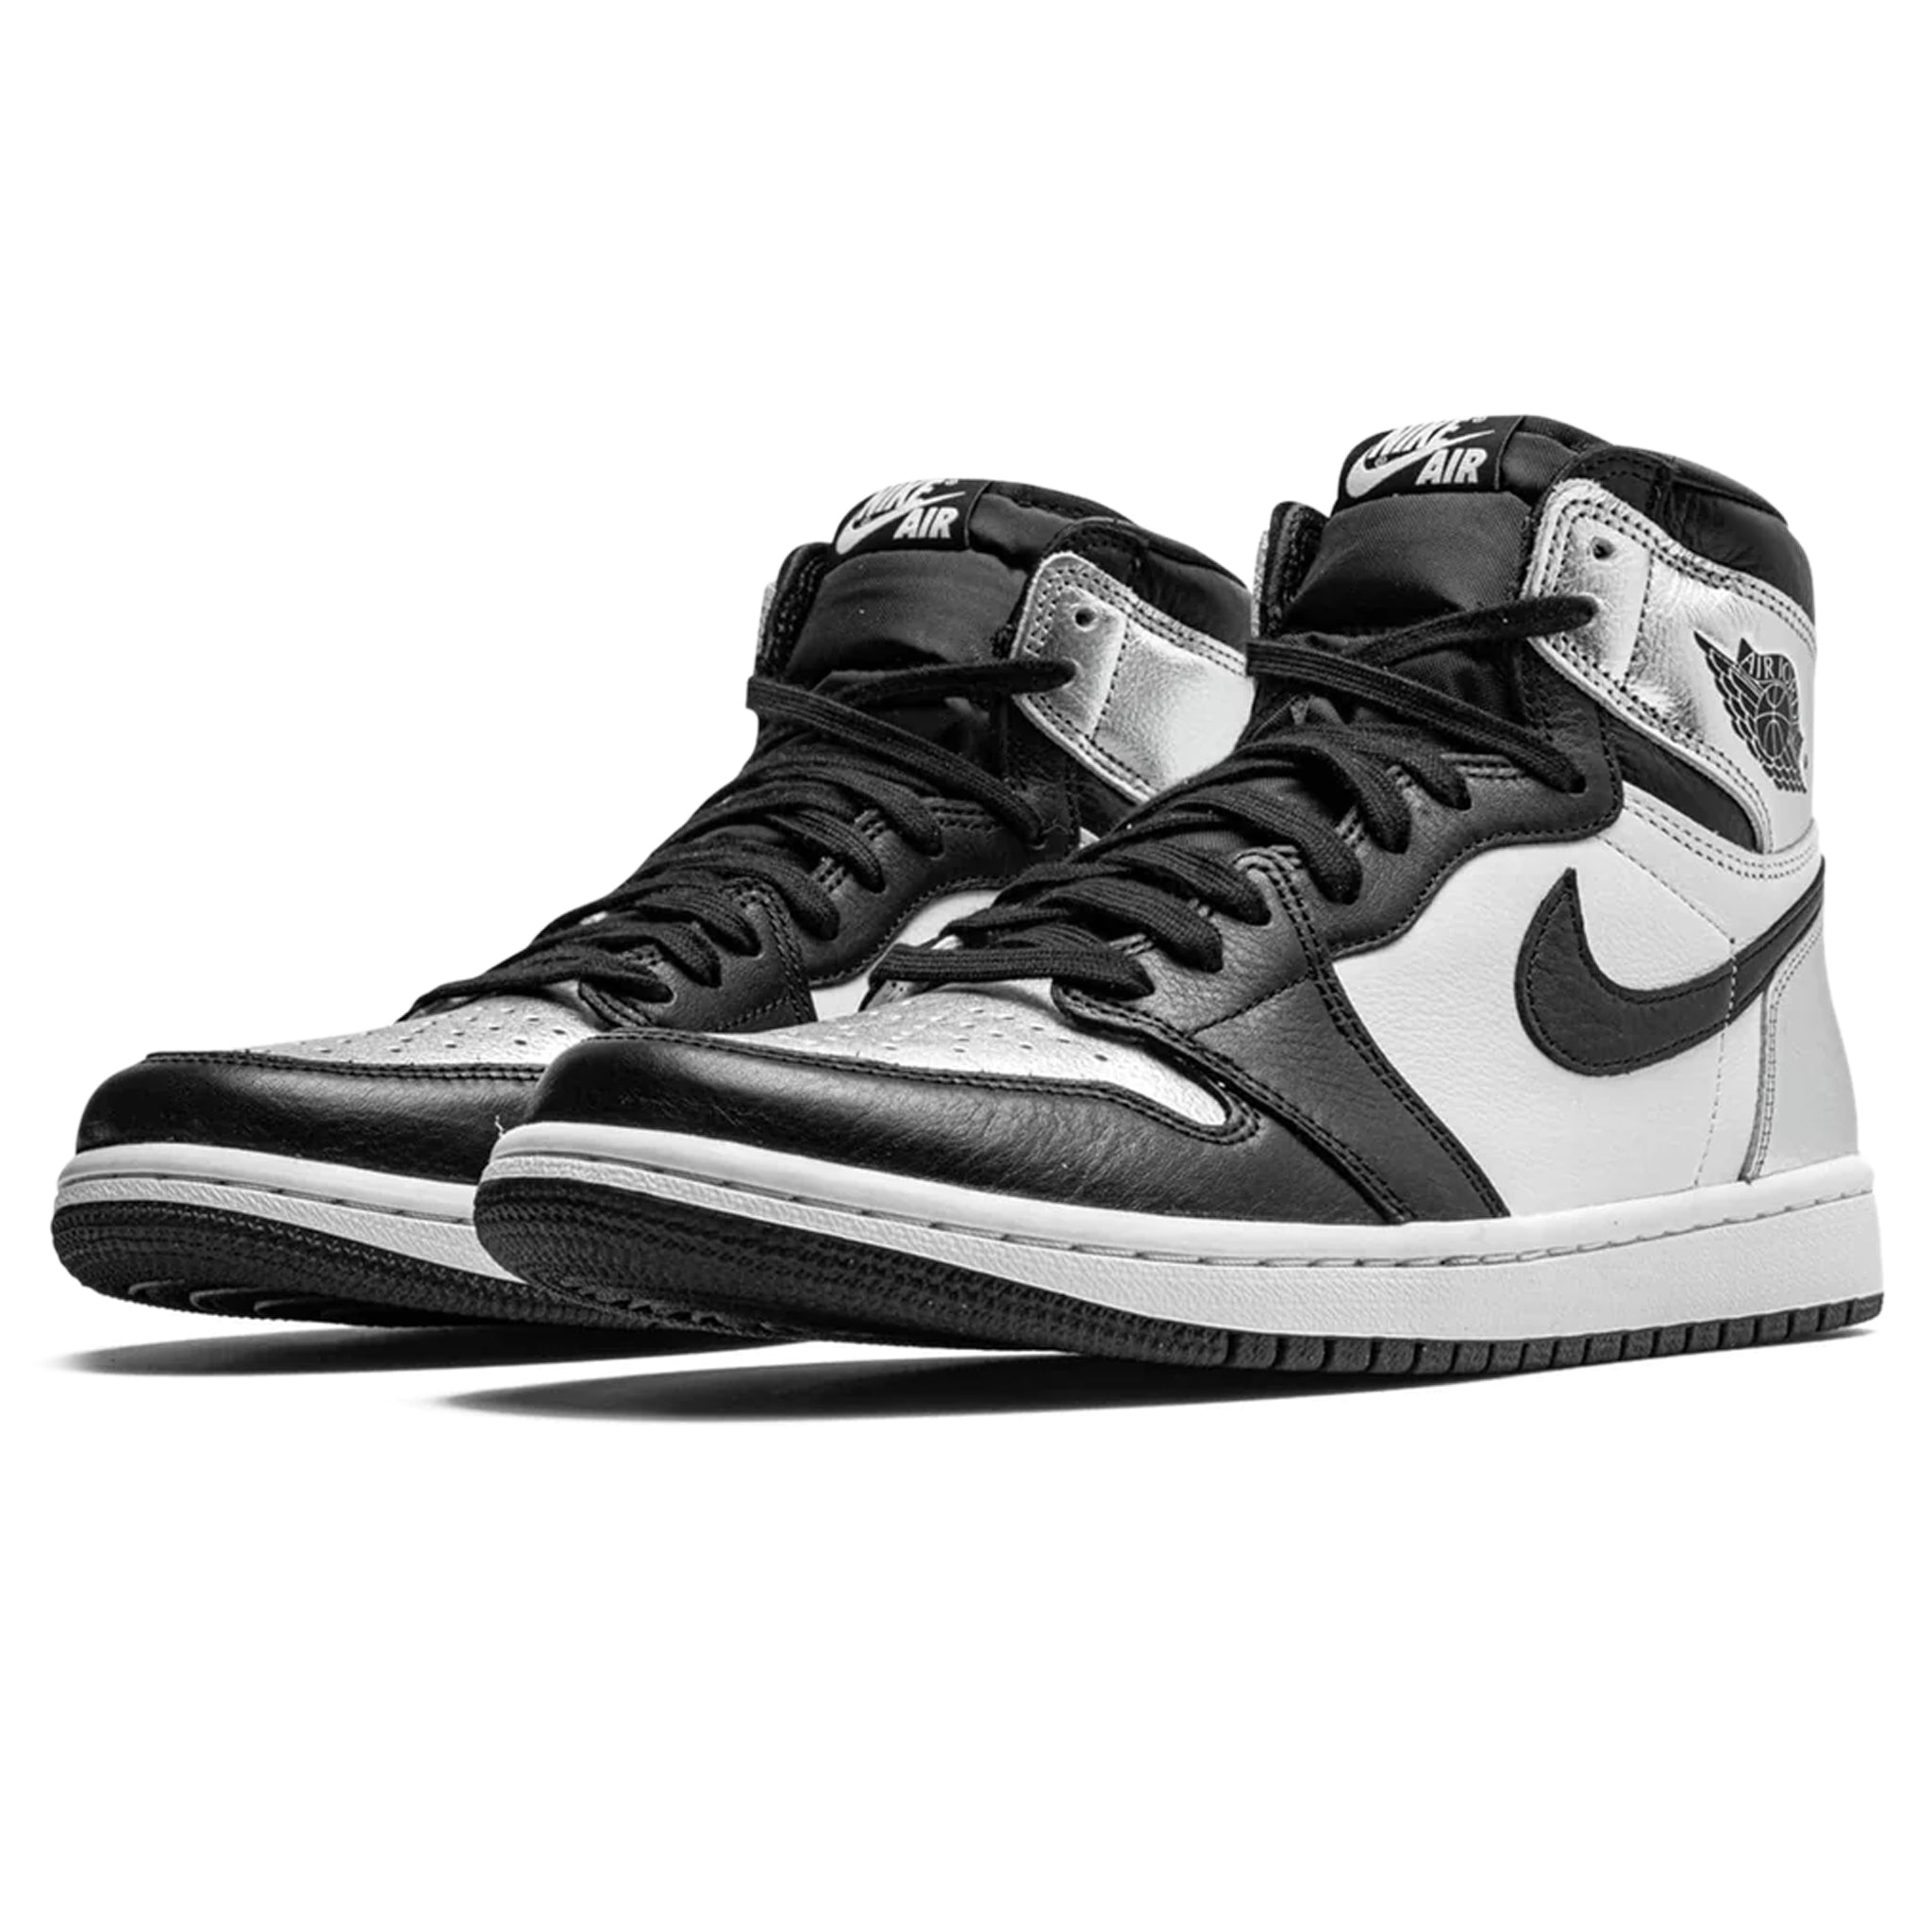 Front side view of Air Jordan 1 Retro High Silver Toe (W) CD0461-001